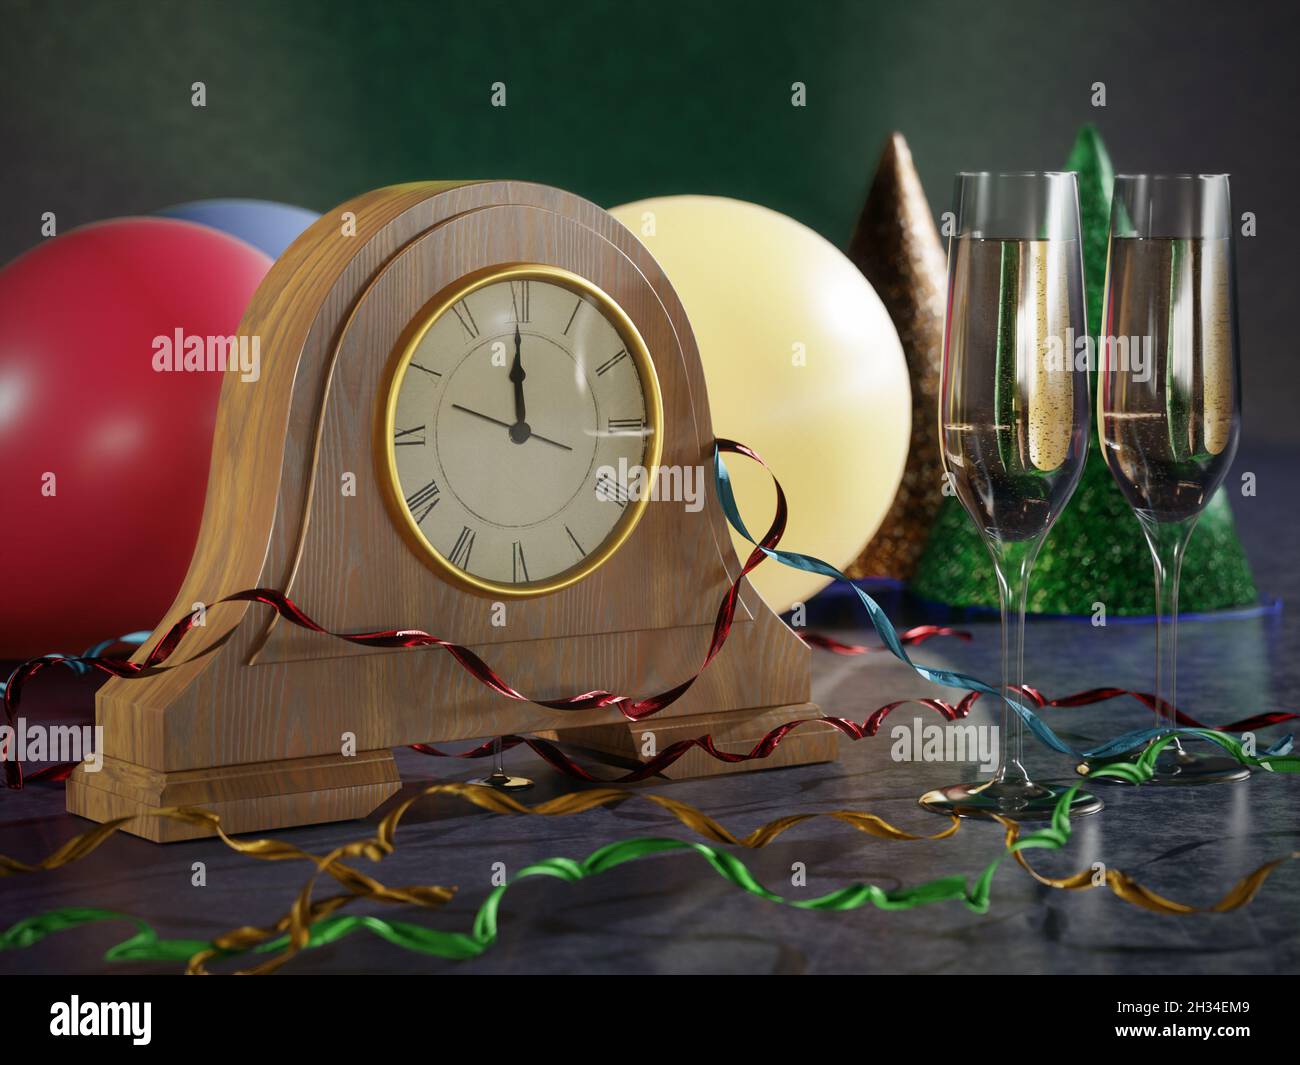 3D rendering of table clock showing midnight, party hats, streamers, balloons, and two glasses of champagne Stock Photo